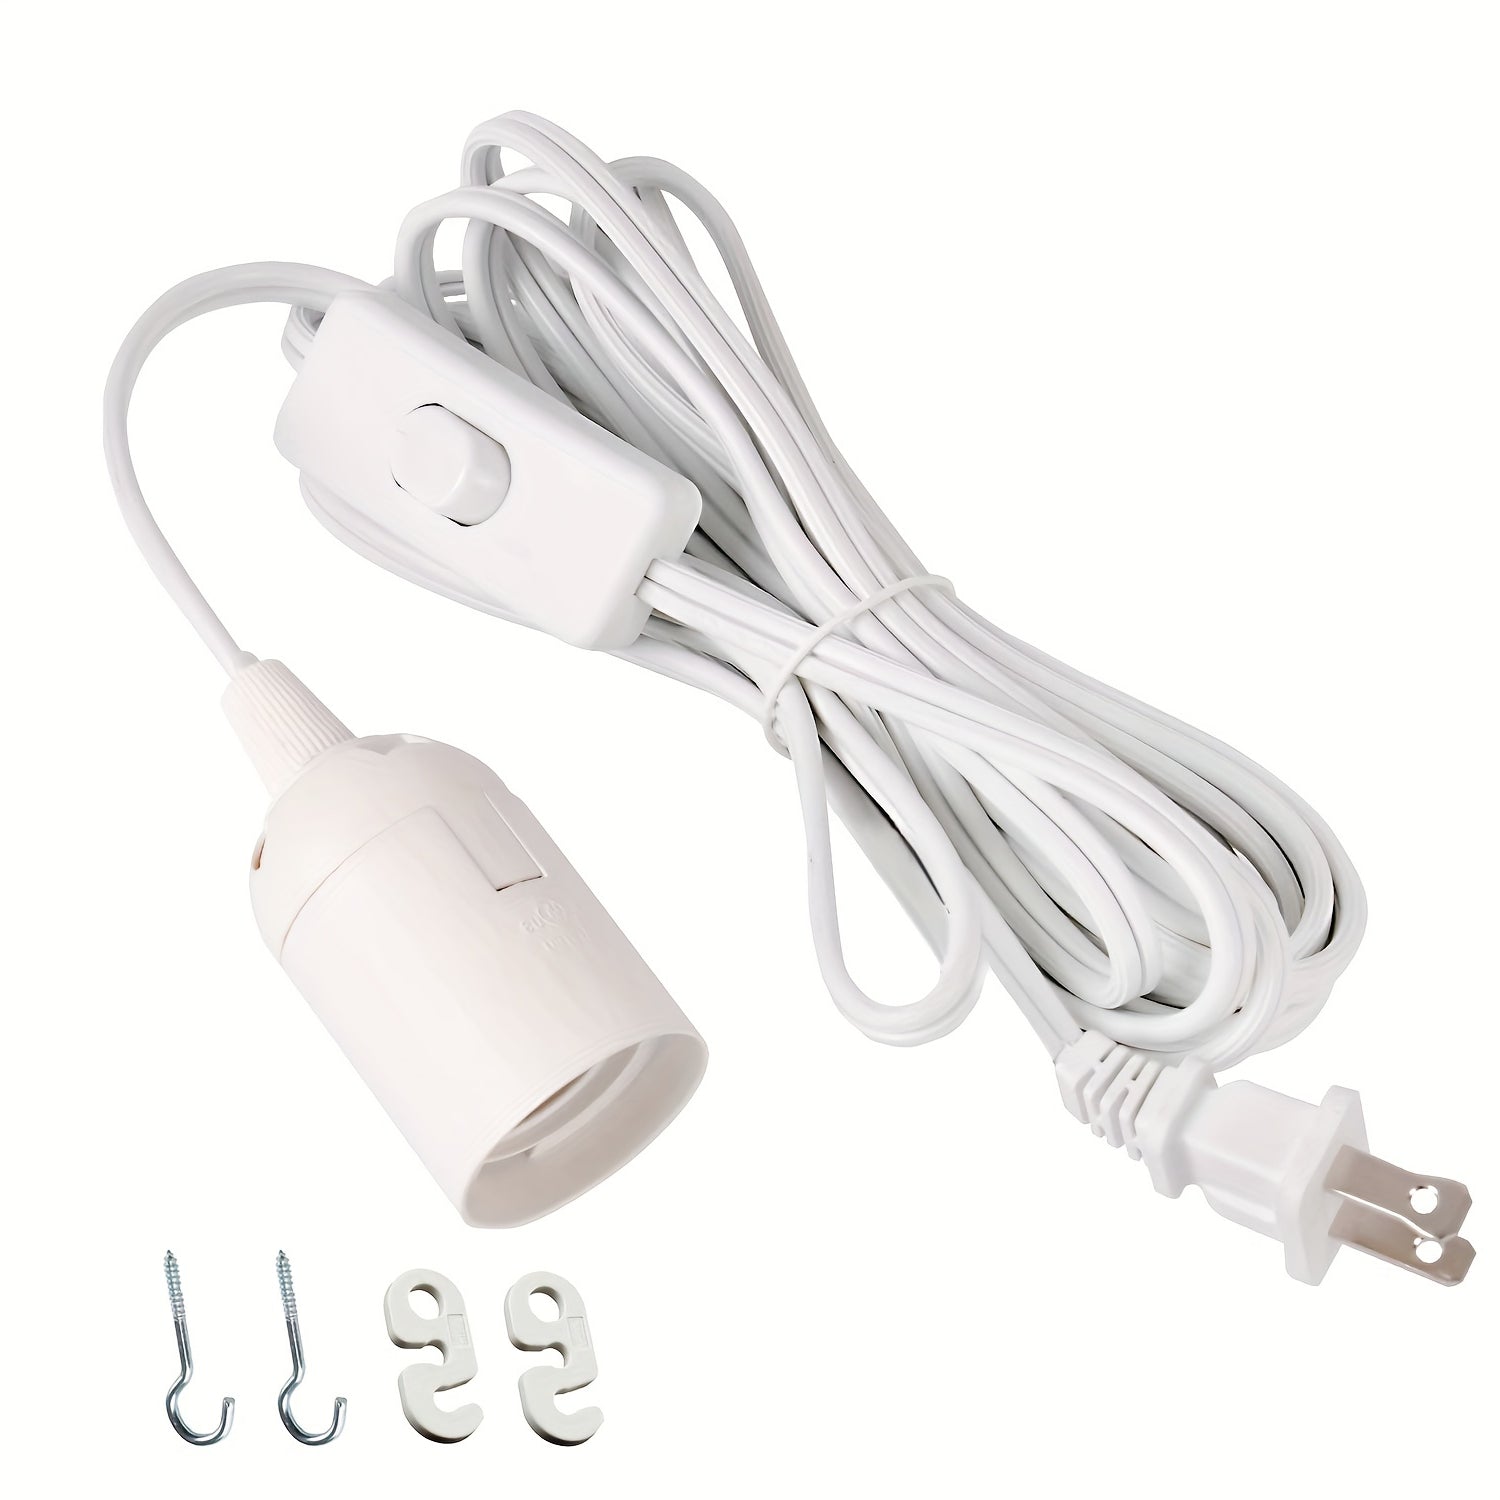 10 Pacck E26/E27 LED Lamp Socket 5.9ft Extension Cord With On/off Switch Without Bulb